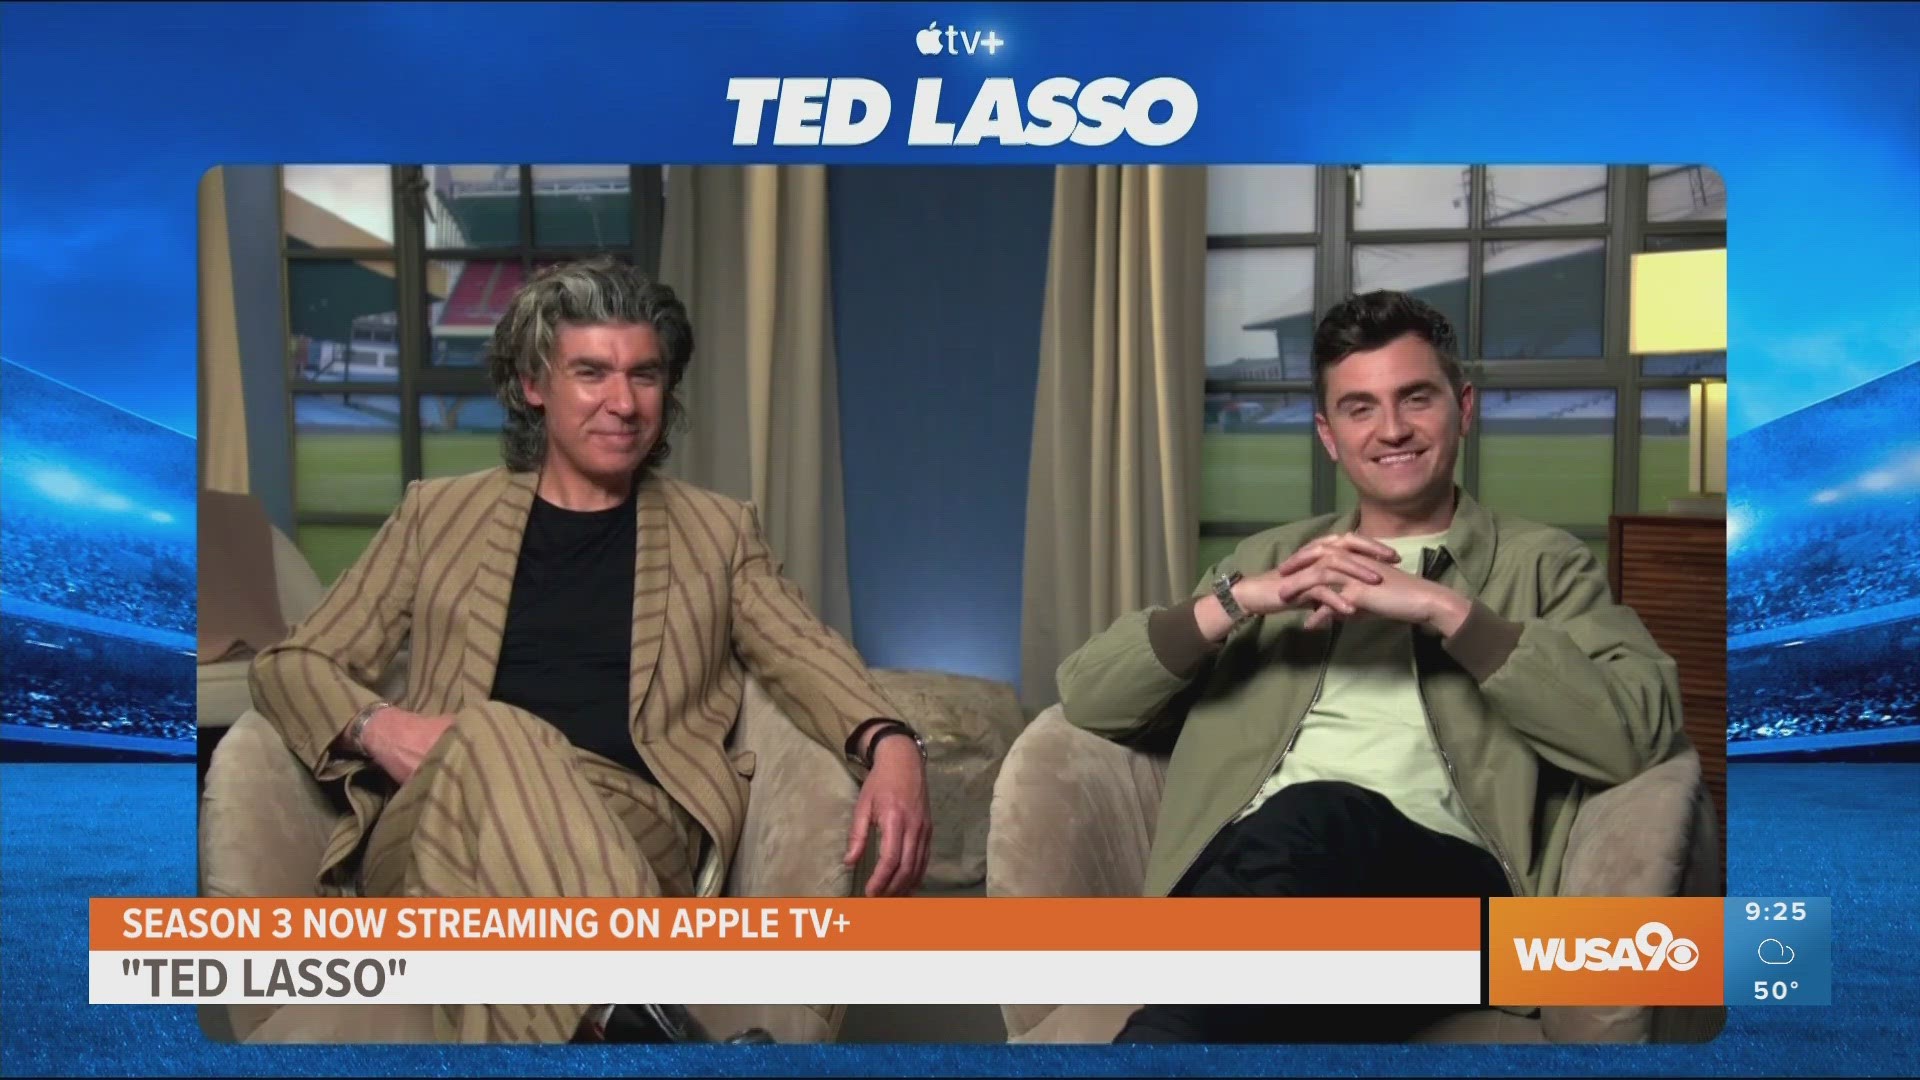 Kristen sits down with actors Billy Harris & James Lance to discuss season 3 of Ted Lasso, which is now streaming on Apple TV+.